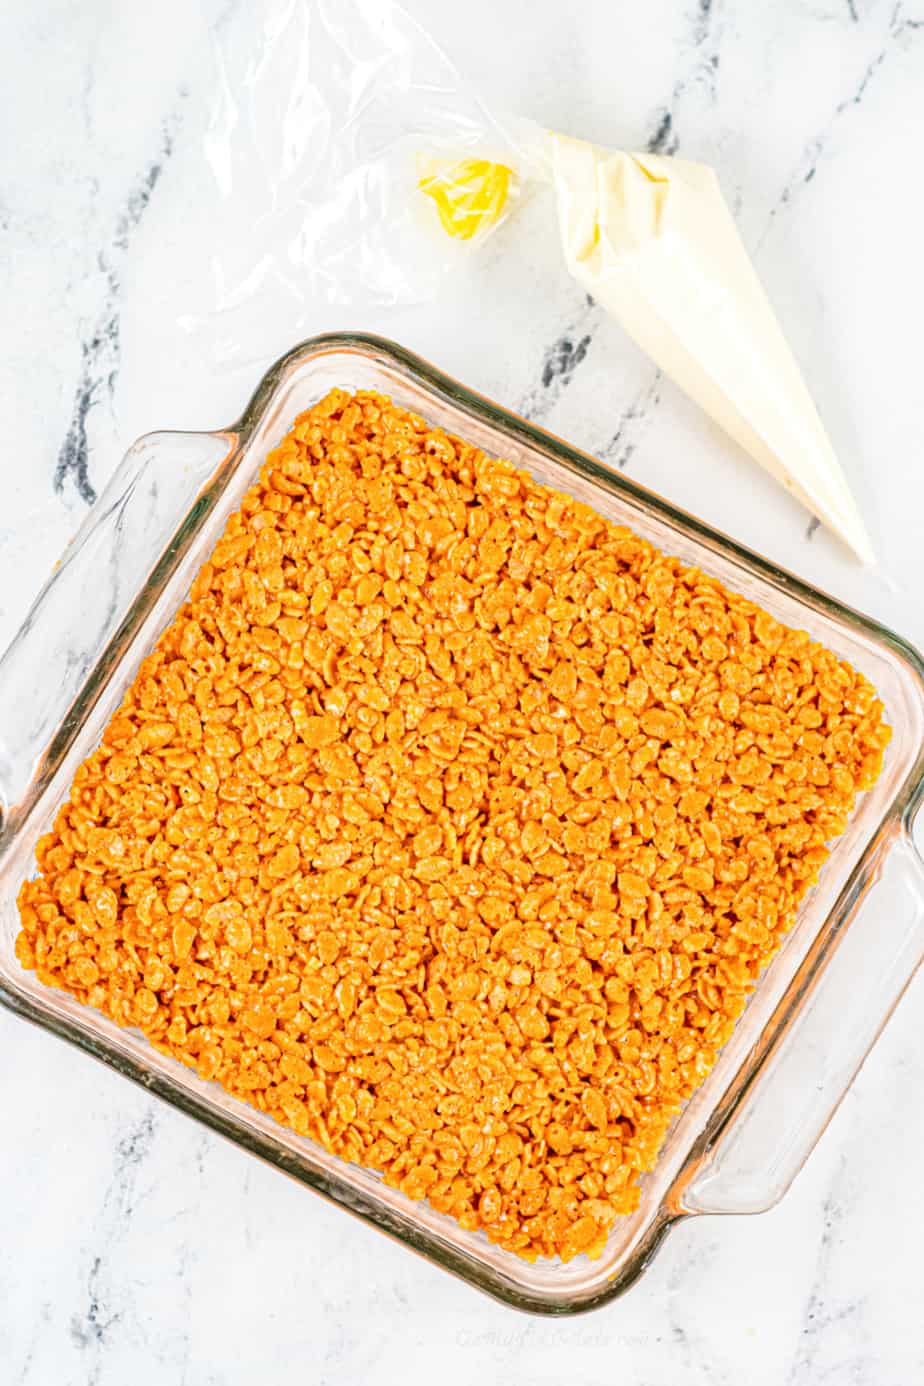 Pressing the pumpkin rice krispie mixture into a square glass pan with a pastry bag of melted chocolate next to the pan.